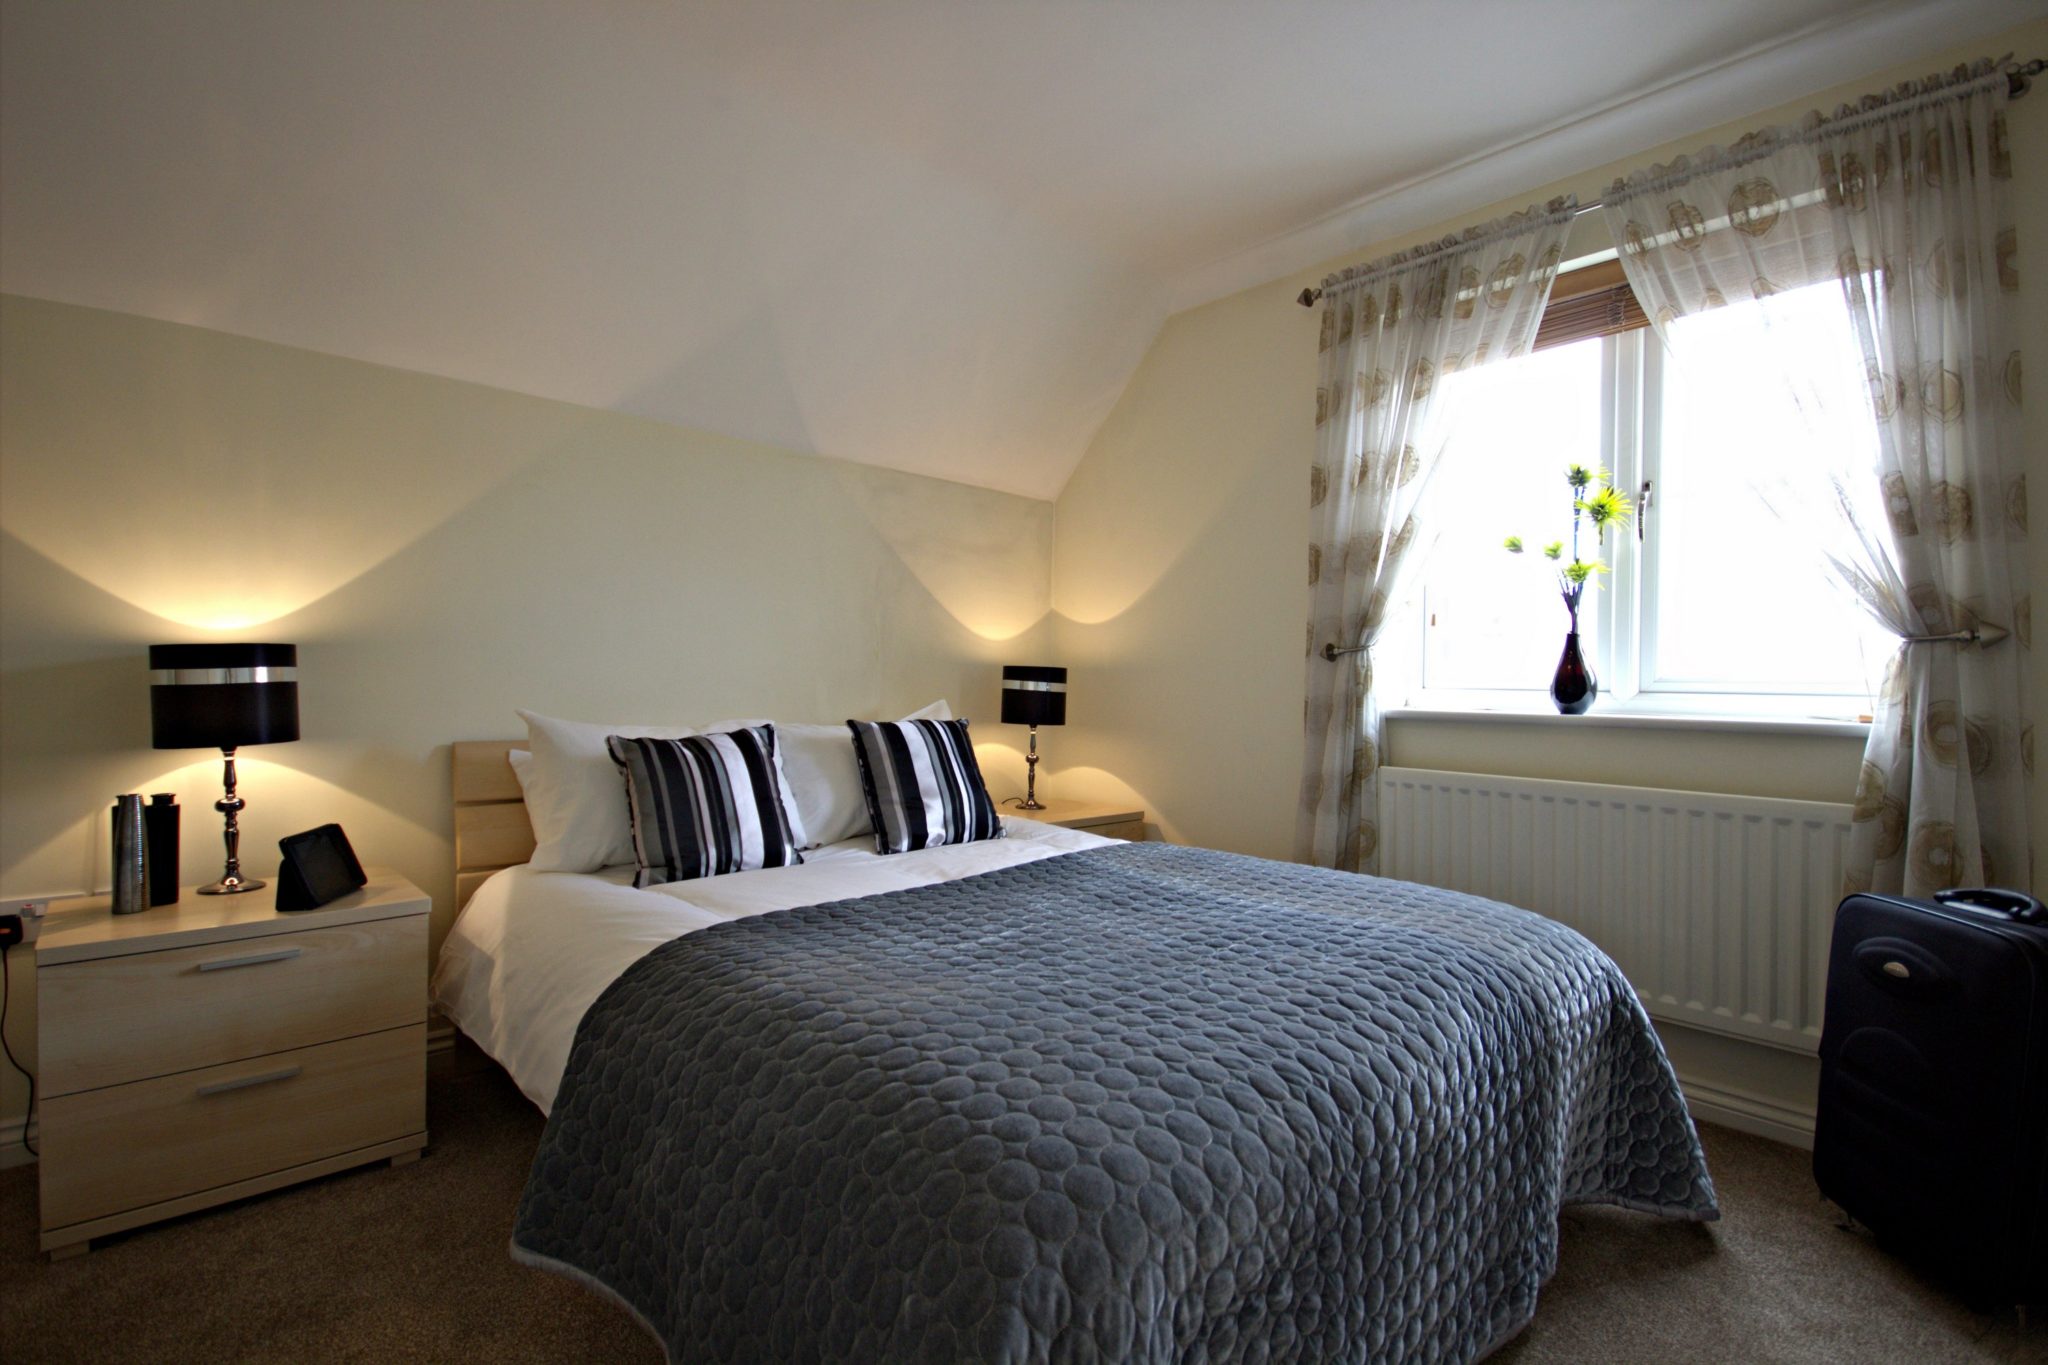 Basingstoke-Serviced-Accommodation-Berkshire-available-NOW!-Book-corporate-Short-Let-Apartments-in-Basingstoke-with-Free-Parking,Sky-TV-&-Wifi-Incl-now!